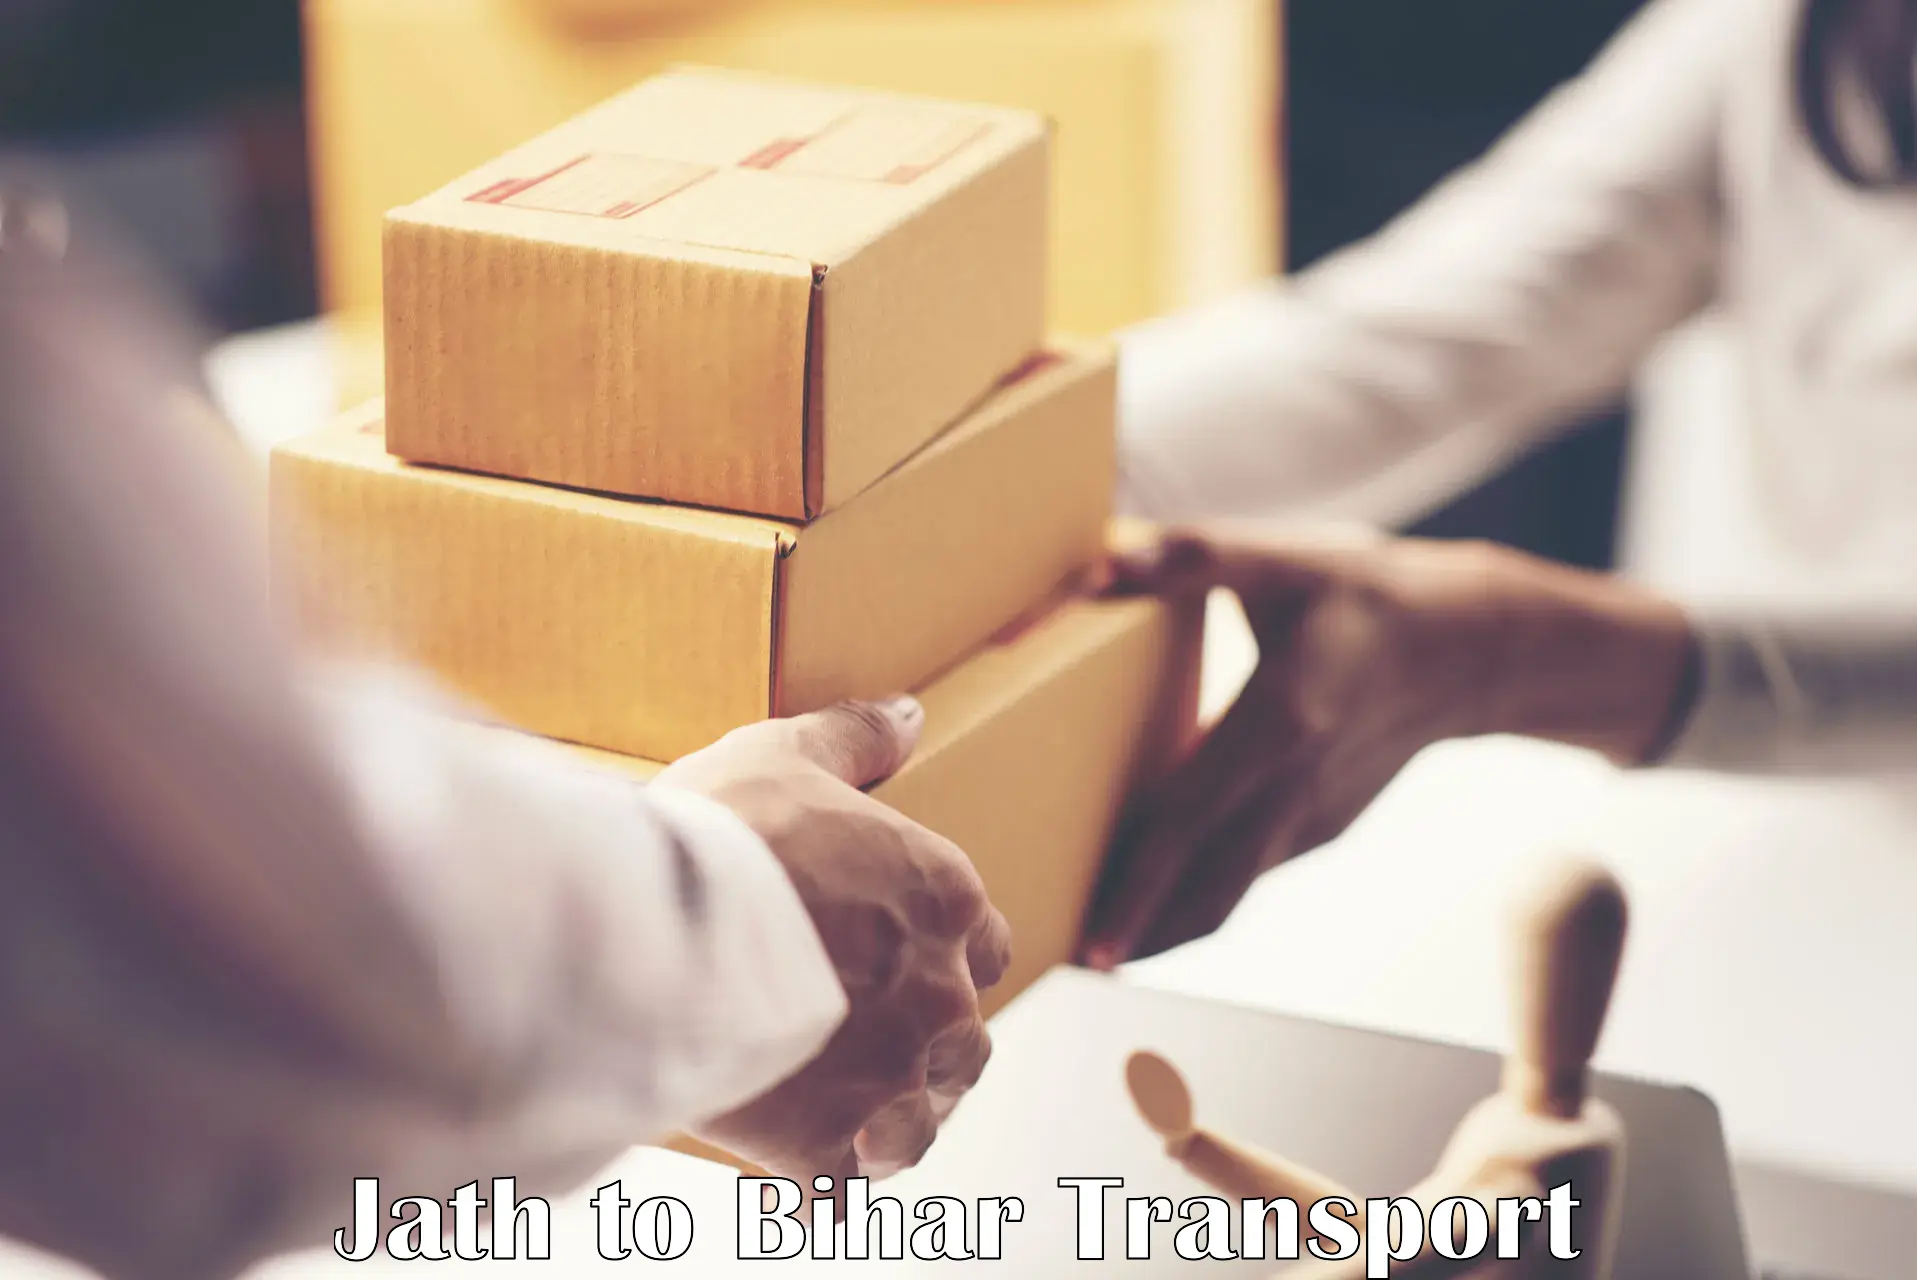 Cargo transportation services Jath to Fatwah